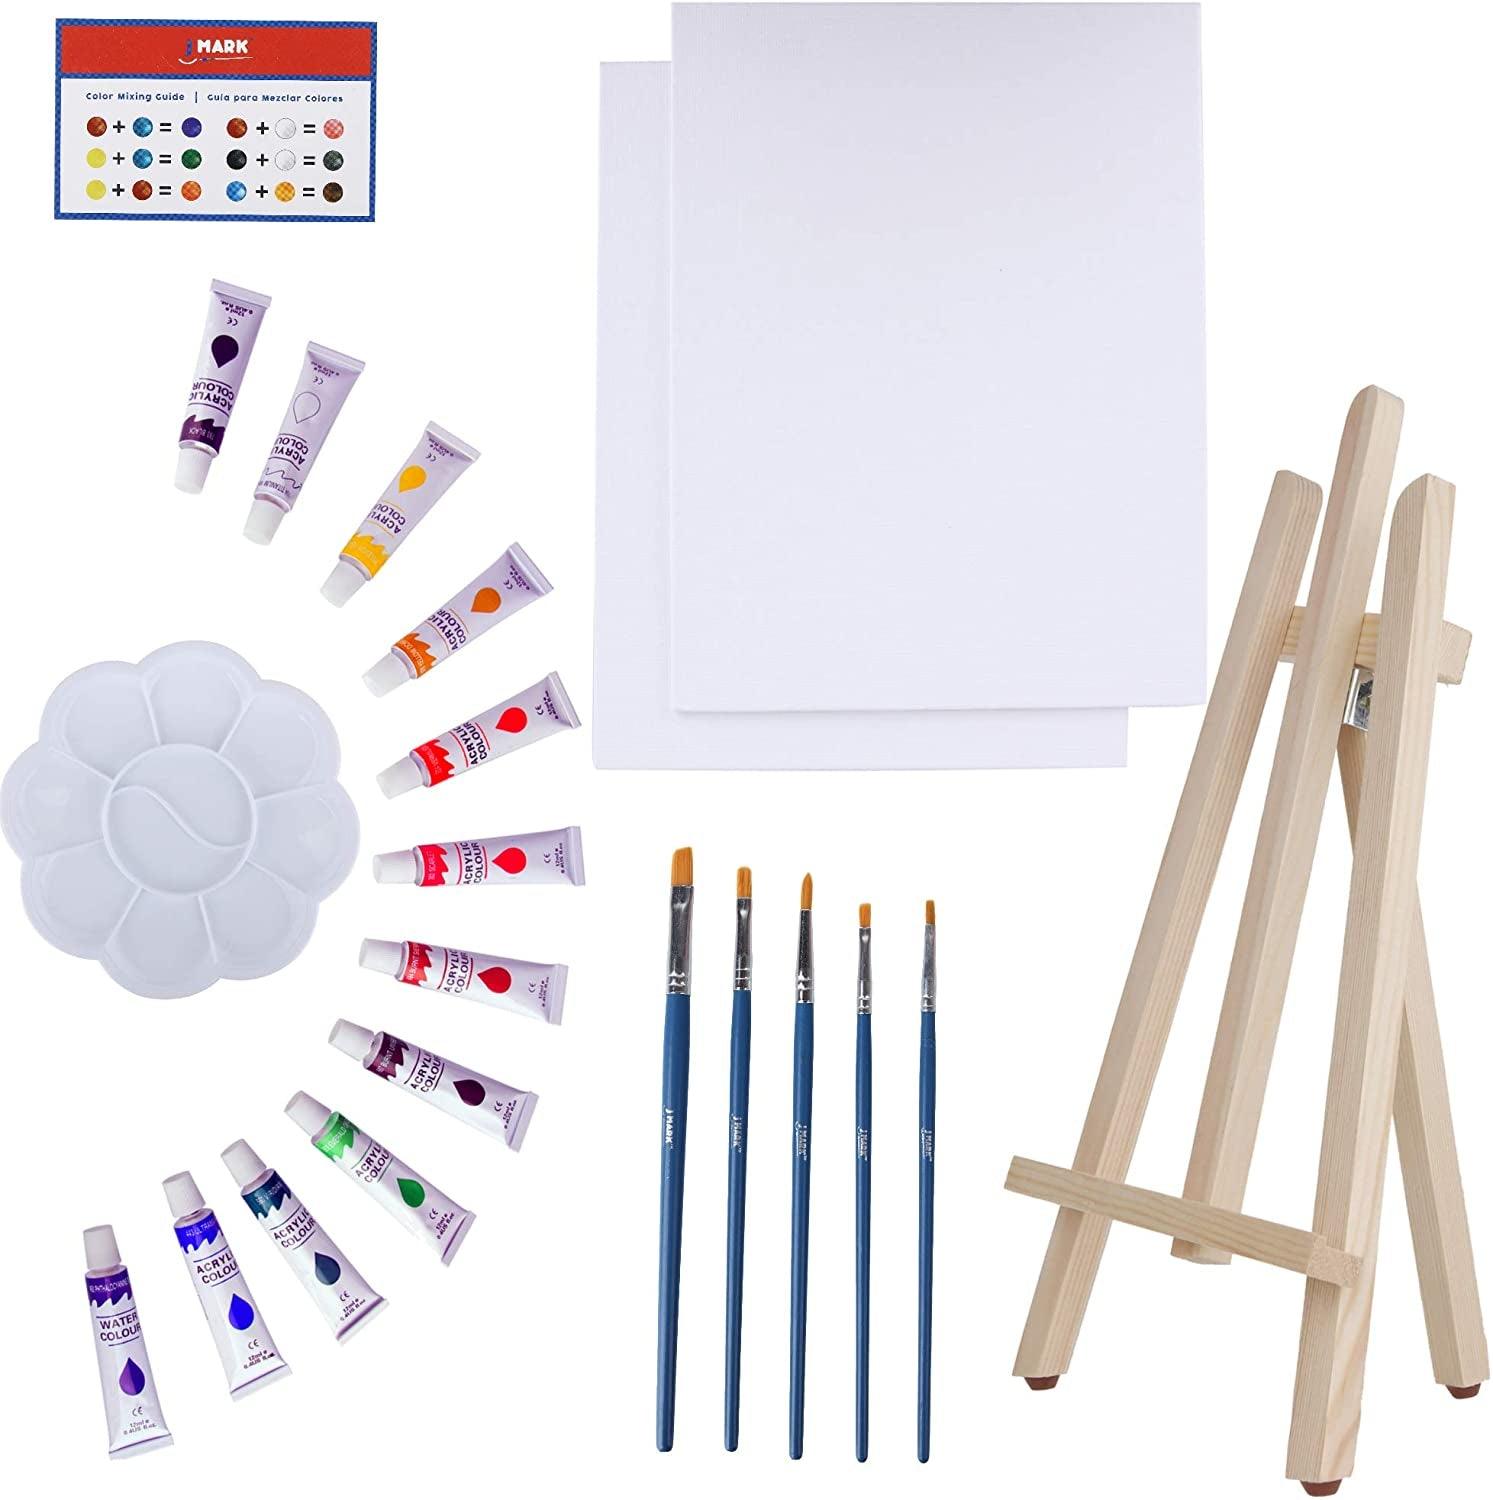 Art Canvas Paint Set 22-Piece Canvas Acrylic Kit with Wood Easel, 8X10 Inch Canvases, 12 Non Toxic Washable Paints, 5 Brushes, Palette - WoodArtSupply